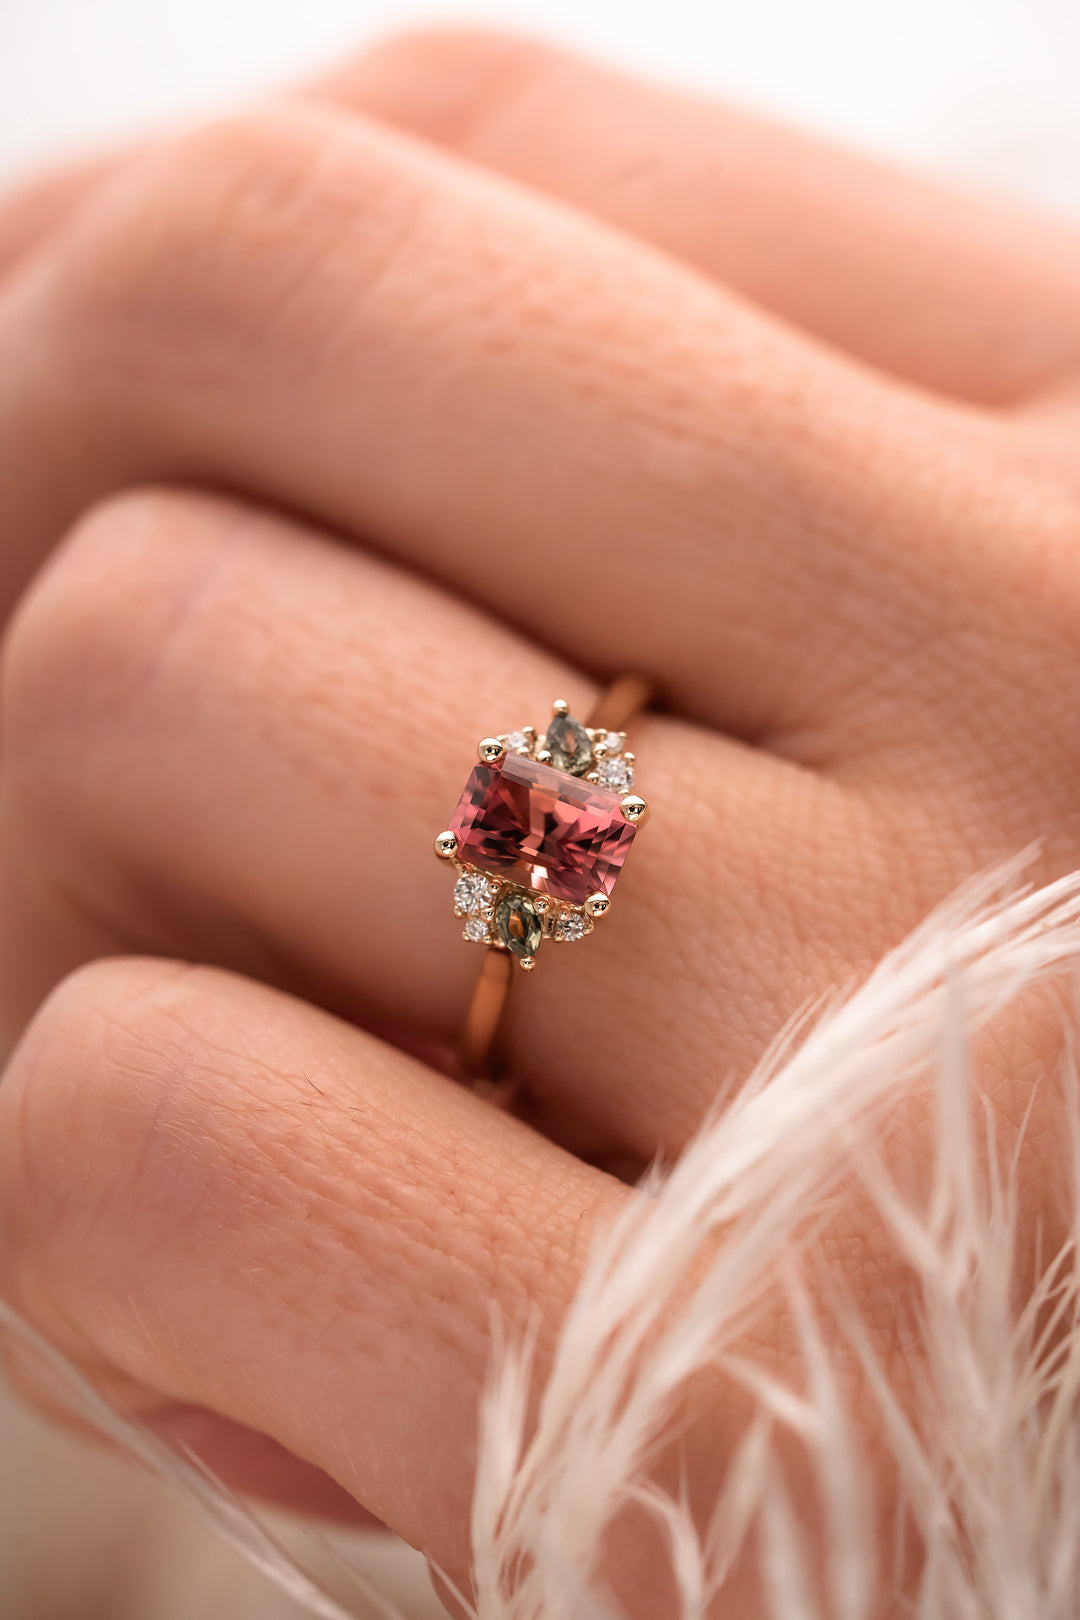 The Fleur 1.48 CT Radiant Pink Tourmaline + Green Sapphire Ring